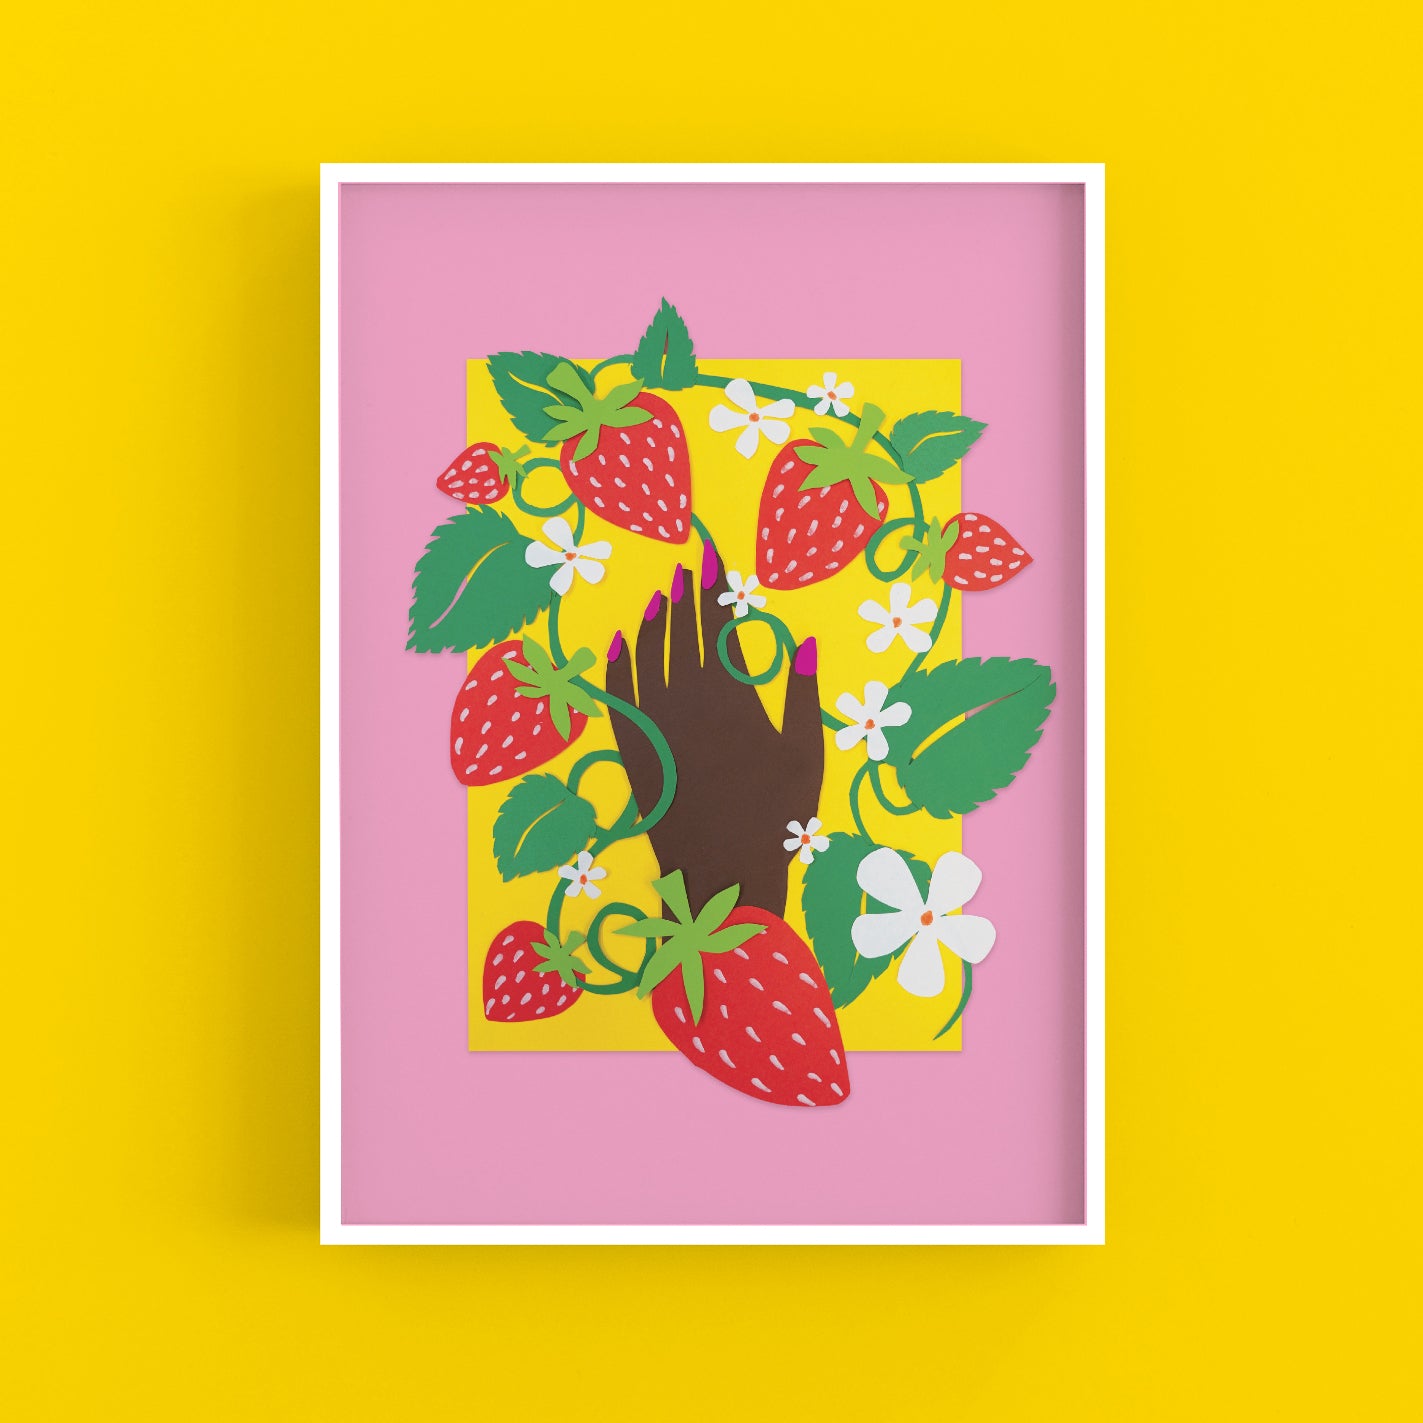 An A3 art print of a papercraft collage artwork. The print depicts strawberries and a brown hand with pink nail polish against a yellow and pink background. The print is in a white frame on a yellow background.